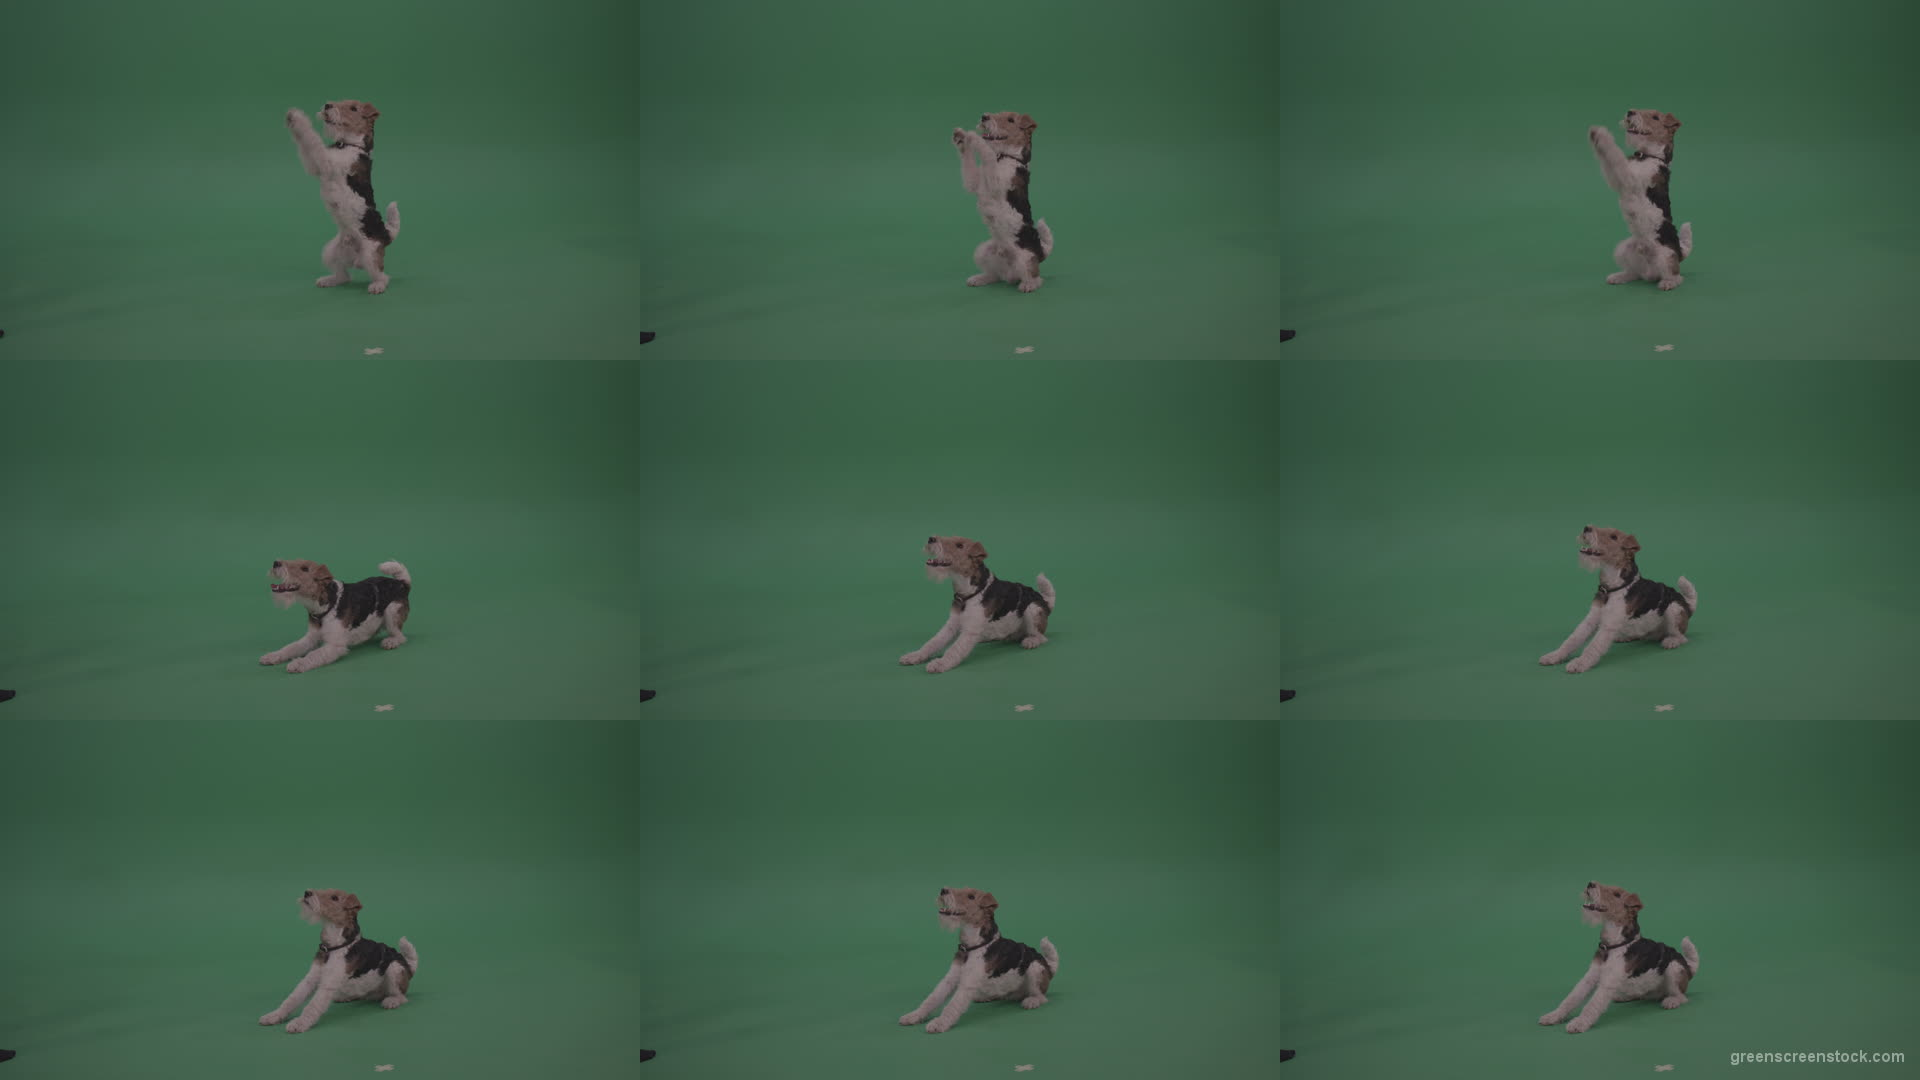 Wire-Fox-Terrier-Standing-On-Back-Feet-Ann-Serving-Then-Lies-Down-On-The-Ground-On-Green-Screen-Wall-Background Green Screen Stock